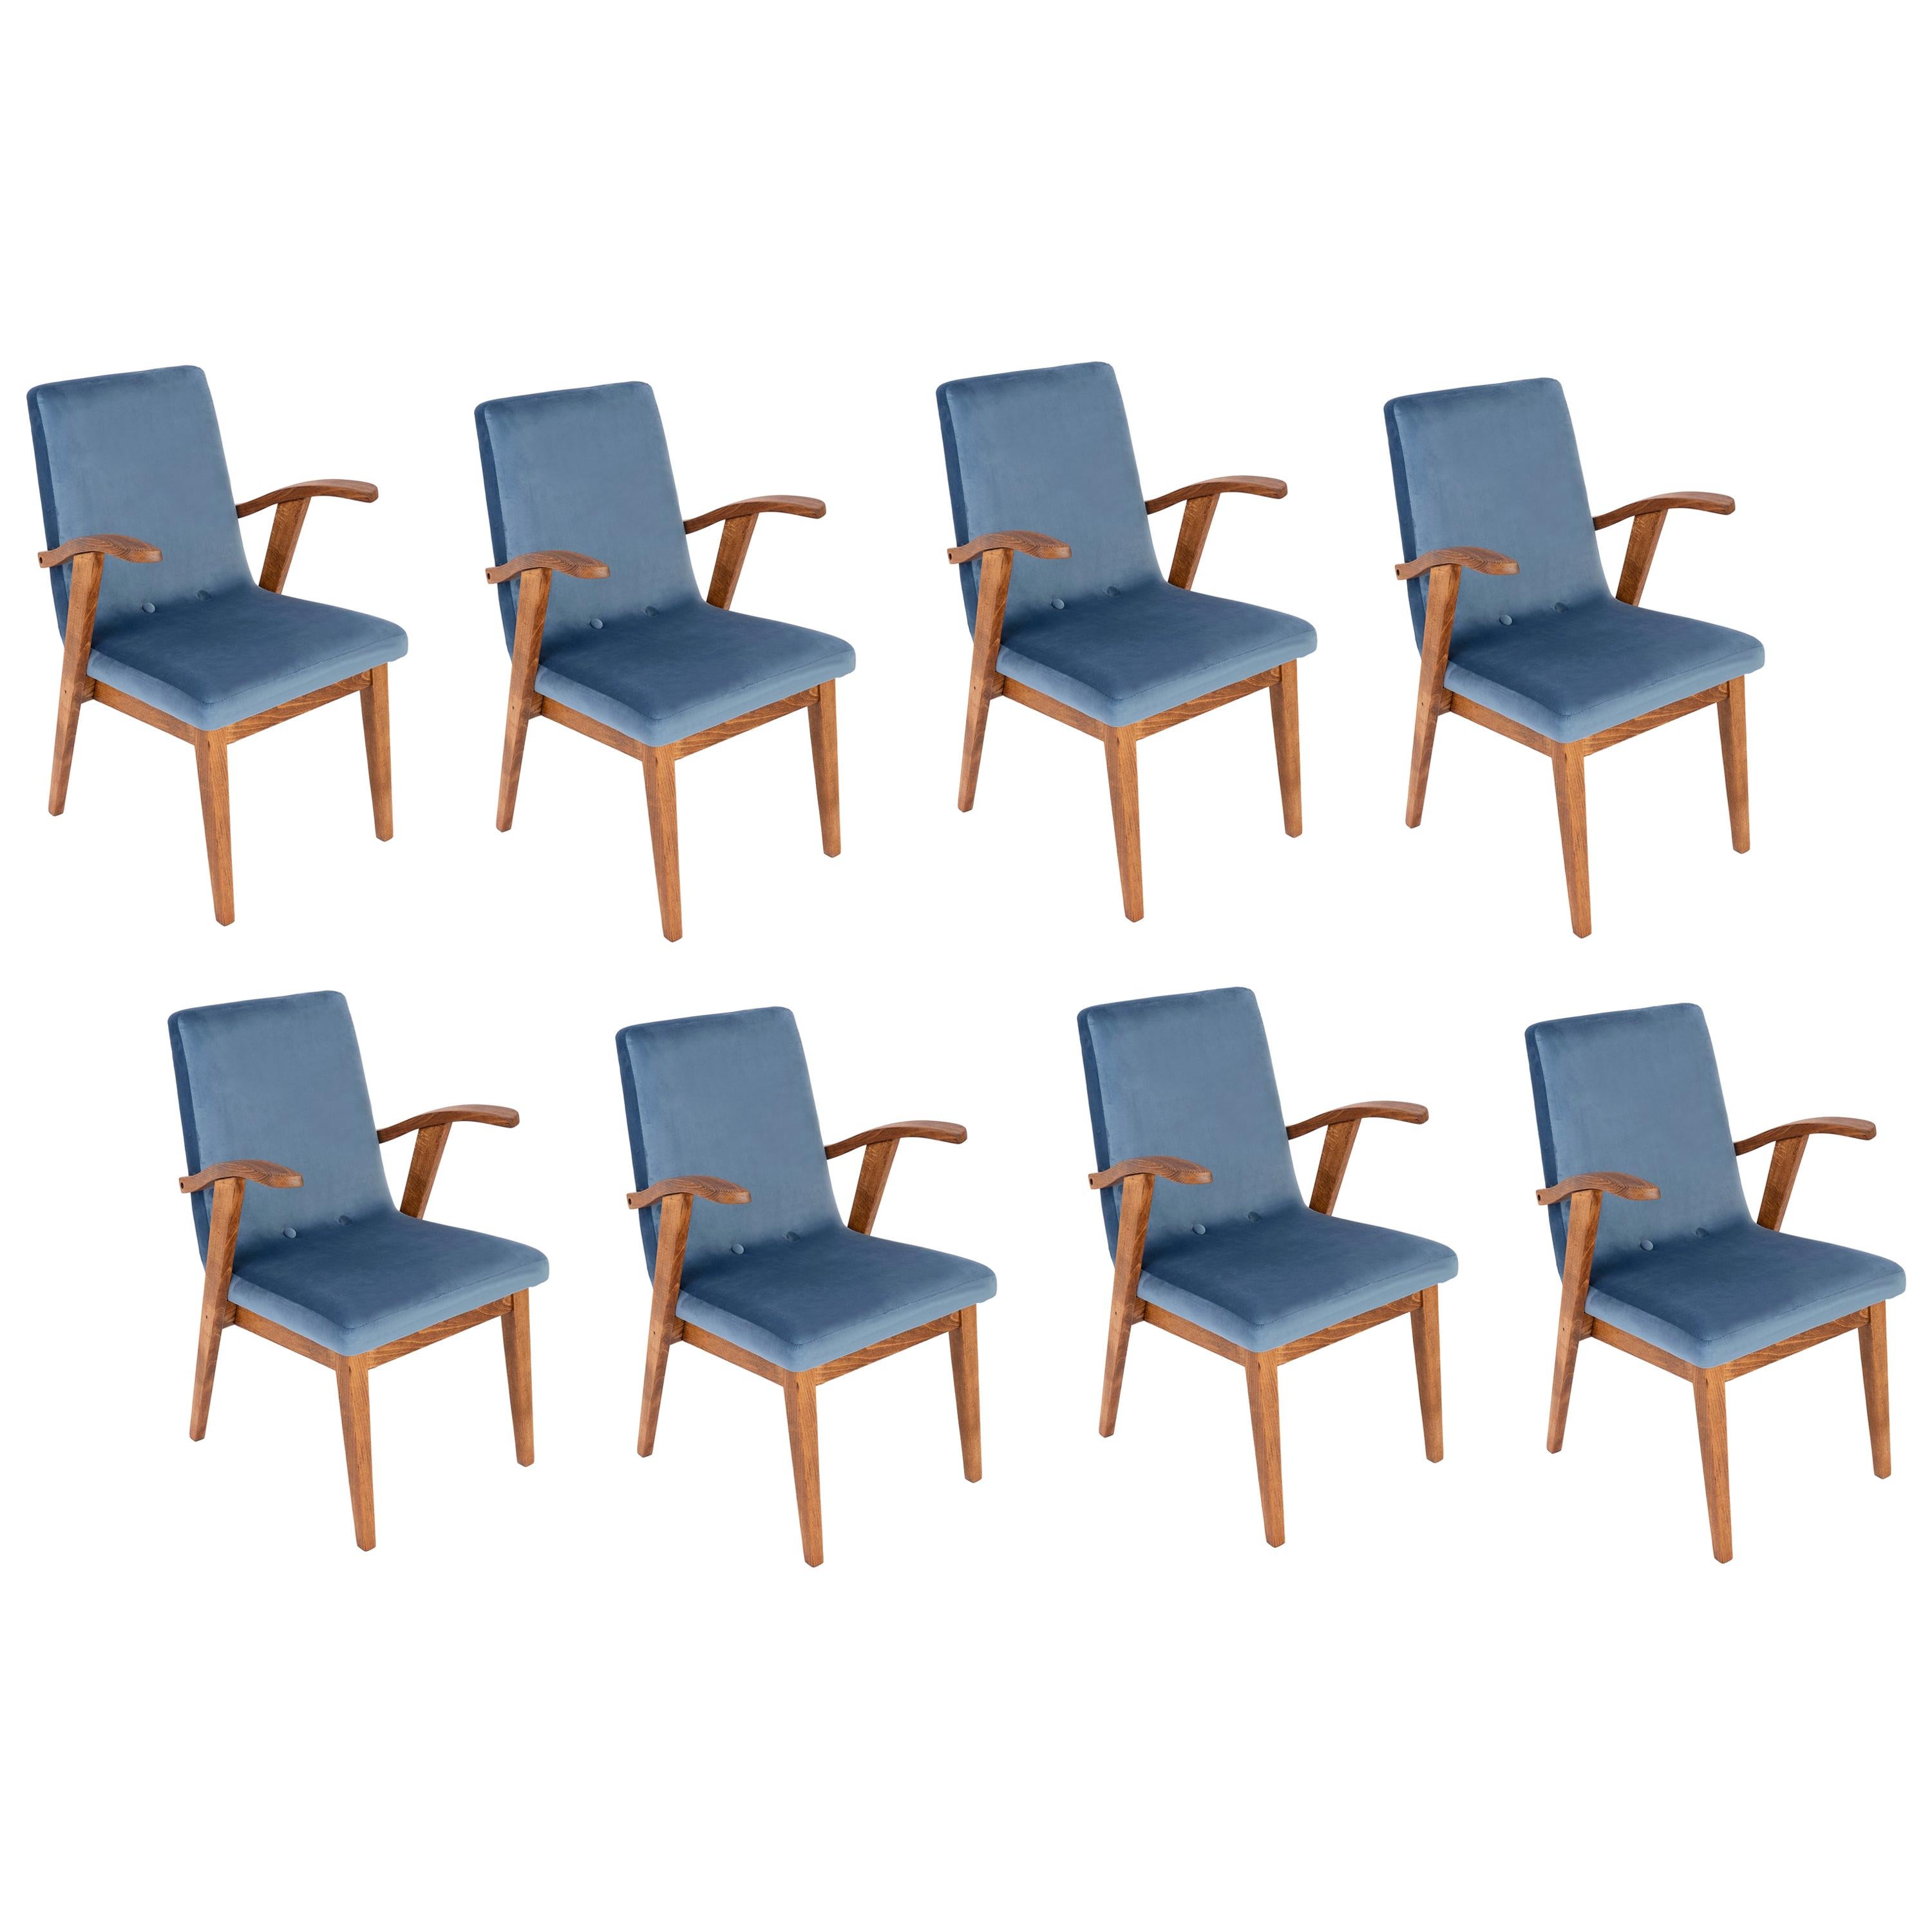 Set of Eight 20th Century Vintage Blue Chairs by Mieczyslaw Puchala, 1960s For Sale